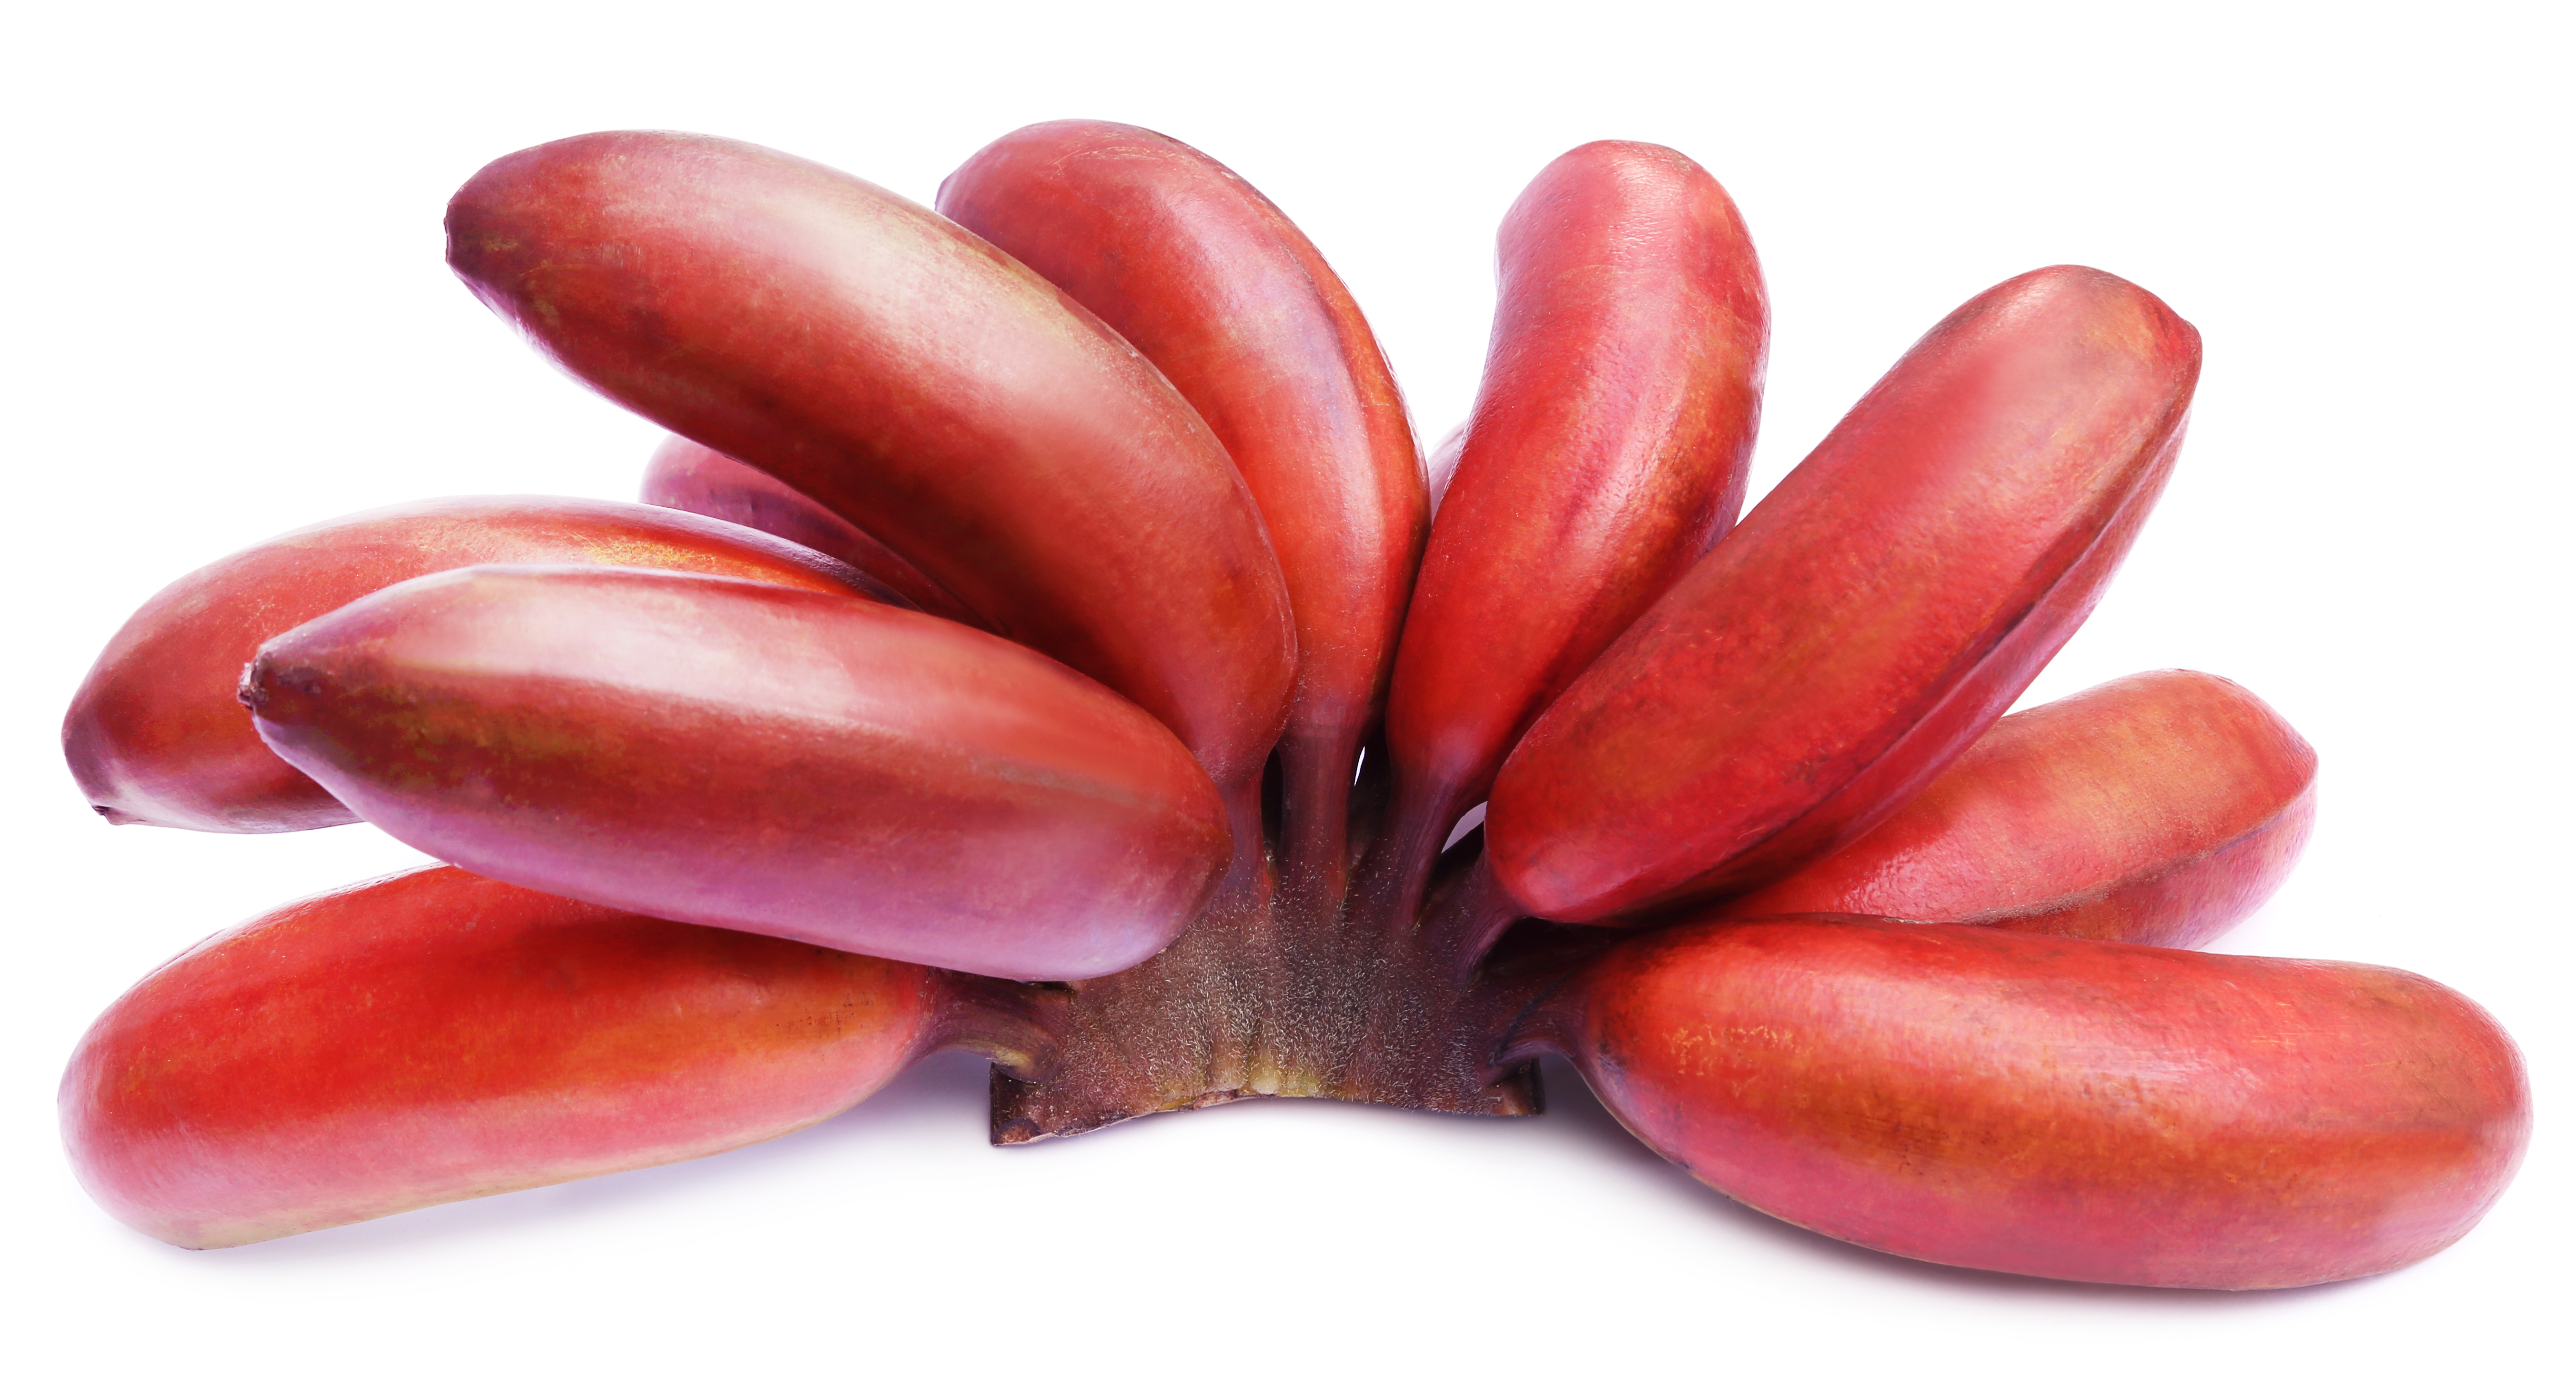 Are Red Bananas for Real